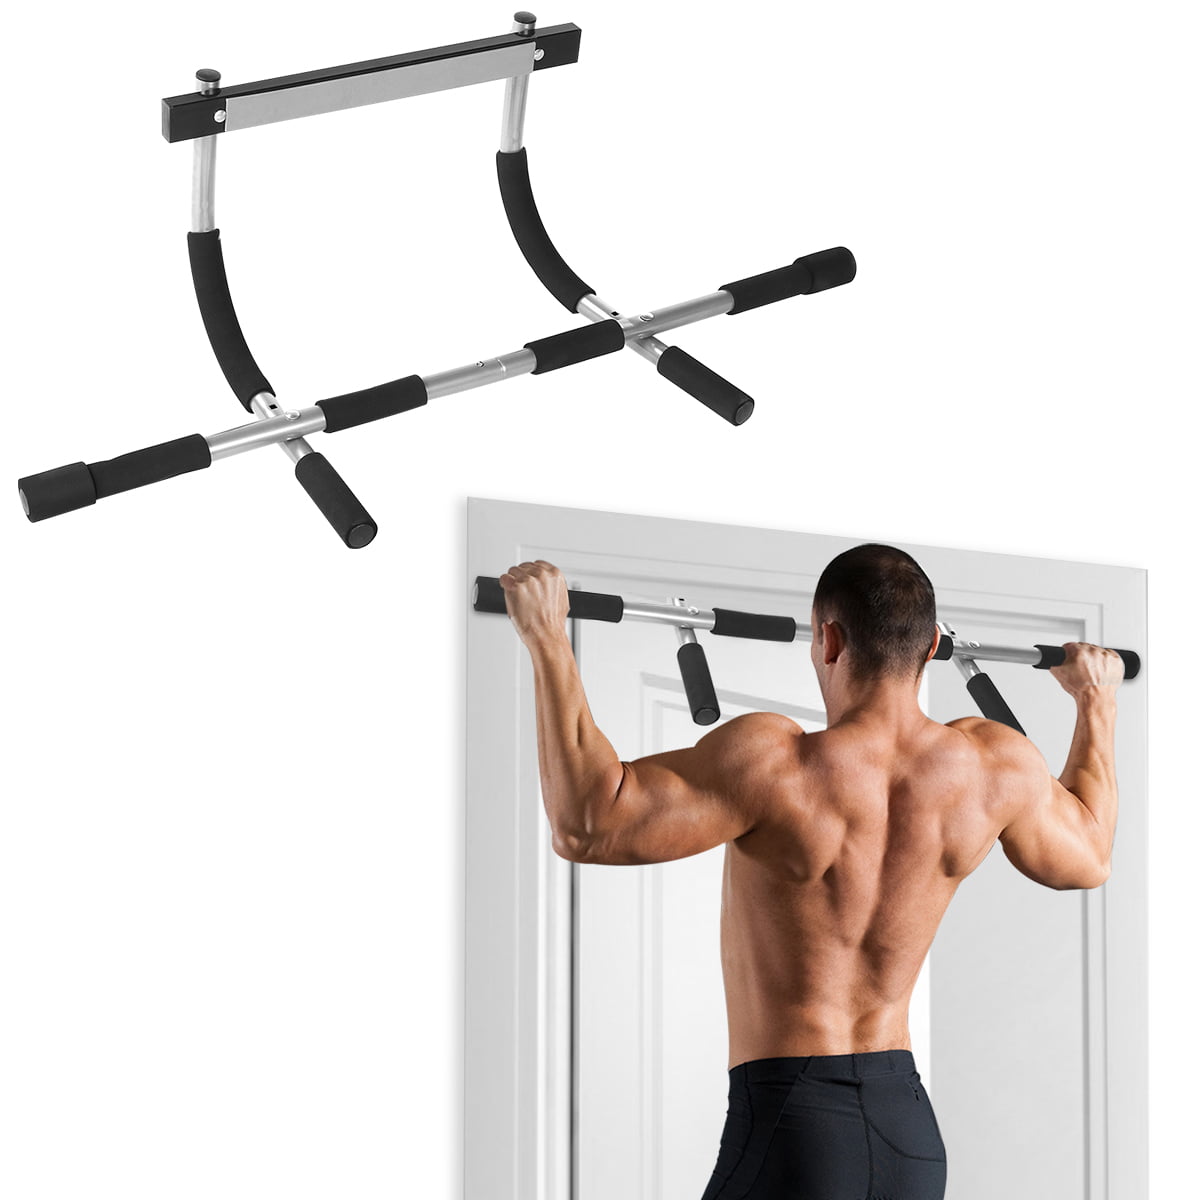 Multifunctional Portable Gym System，Home Gym Exercise Equipment Strength Training Upper Body Workout Bar Tescat Pull Up Bar 